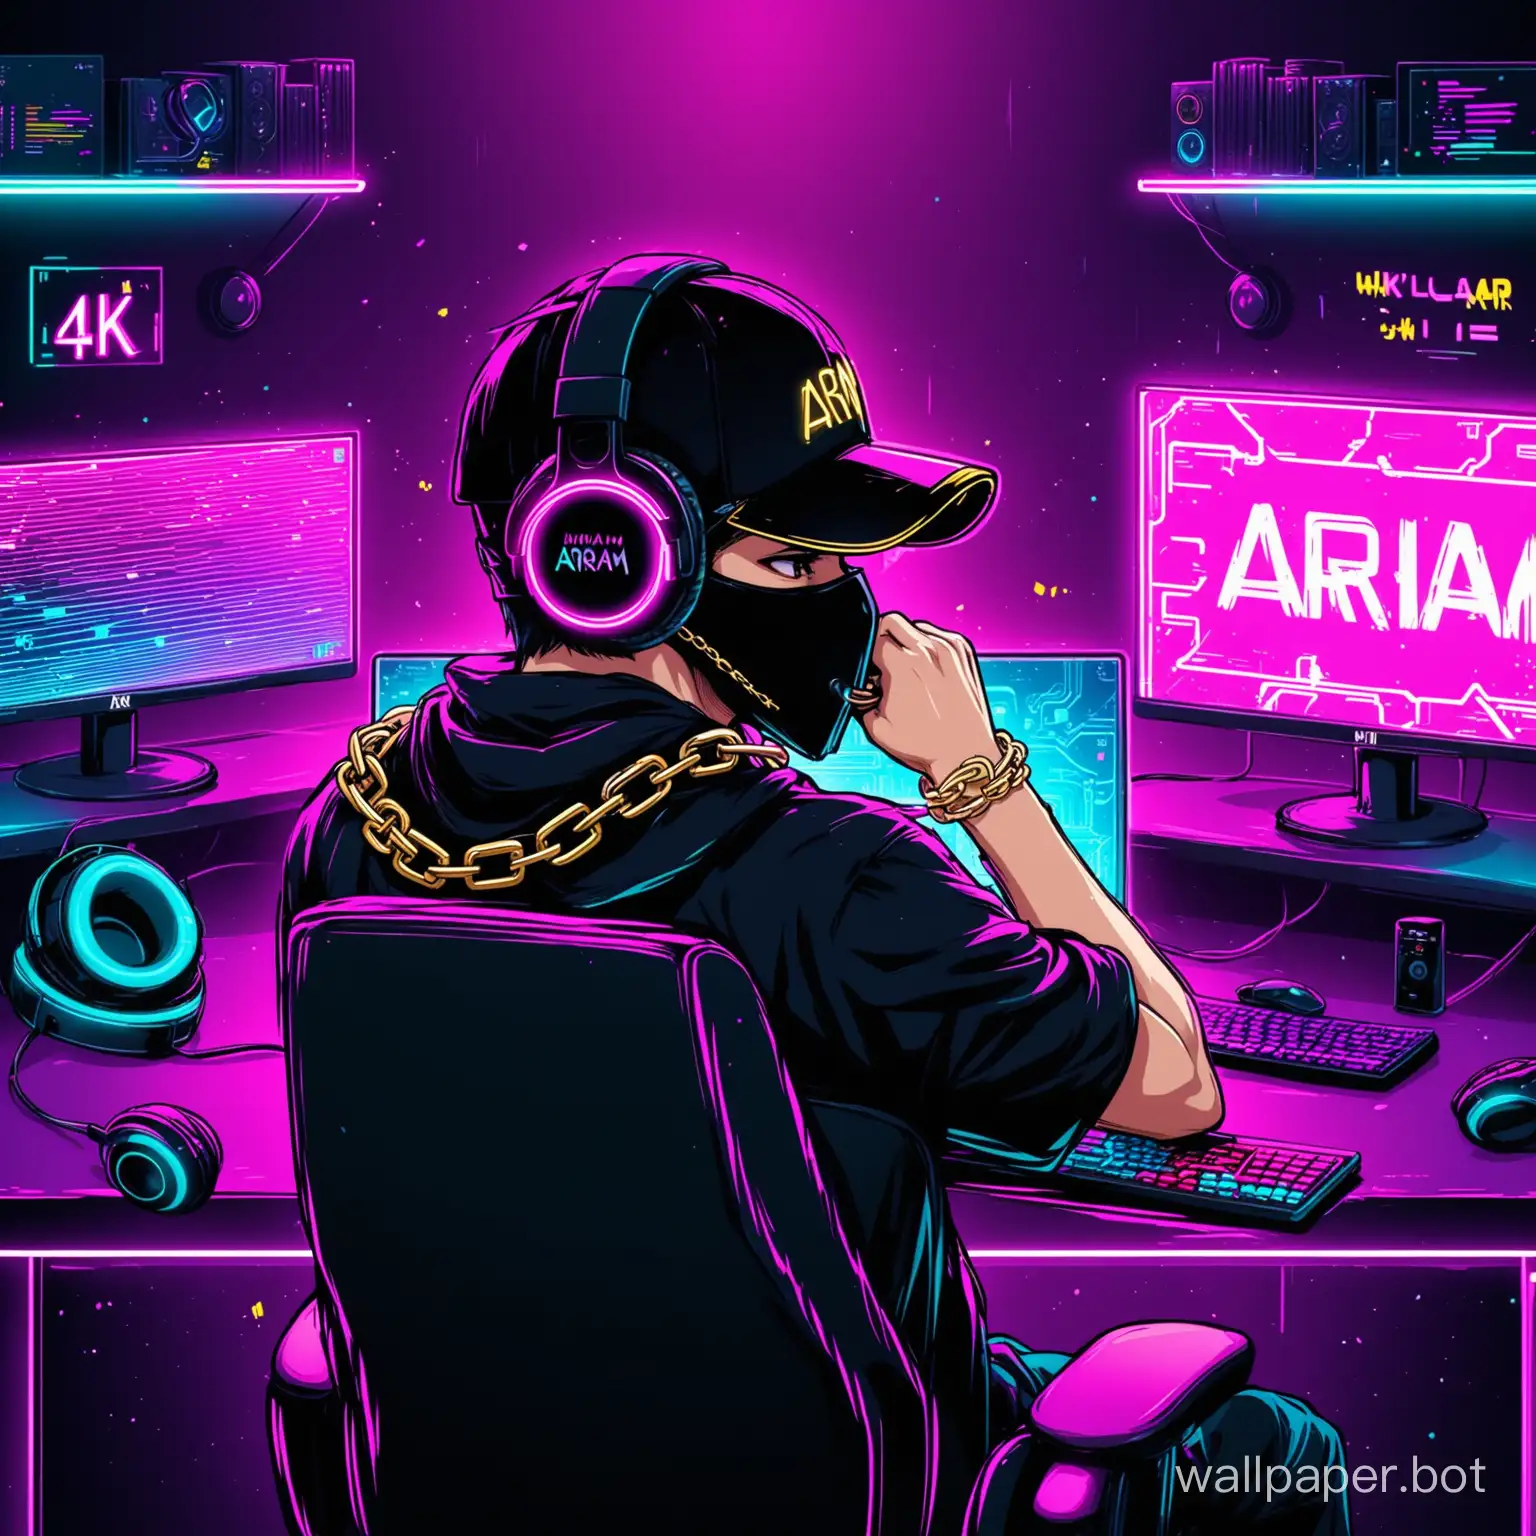 Boy-Gaming-with-Black-Mask-4K-Wallpaper-for-Laptop-with-Neon-Arnam-Background